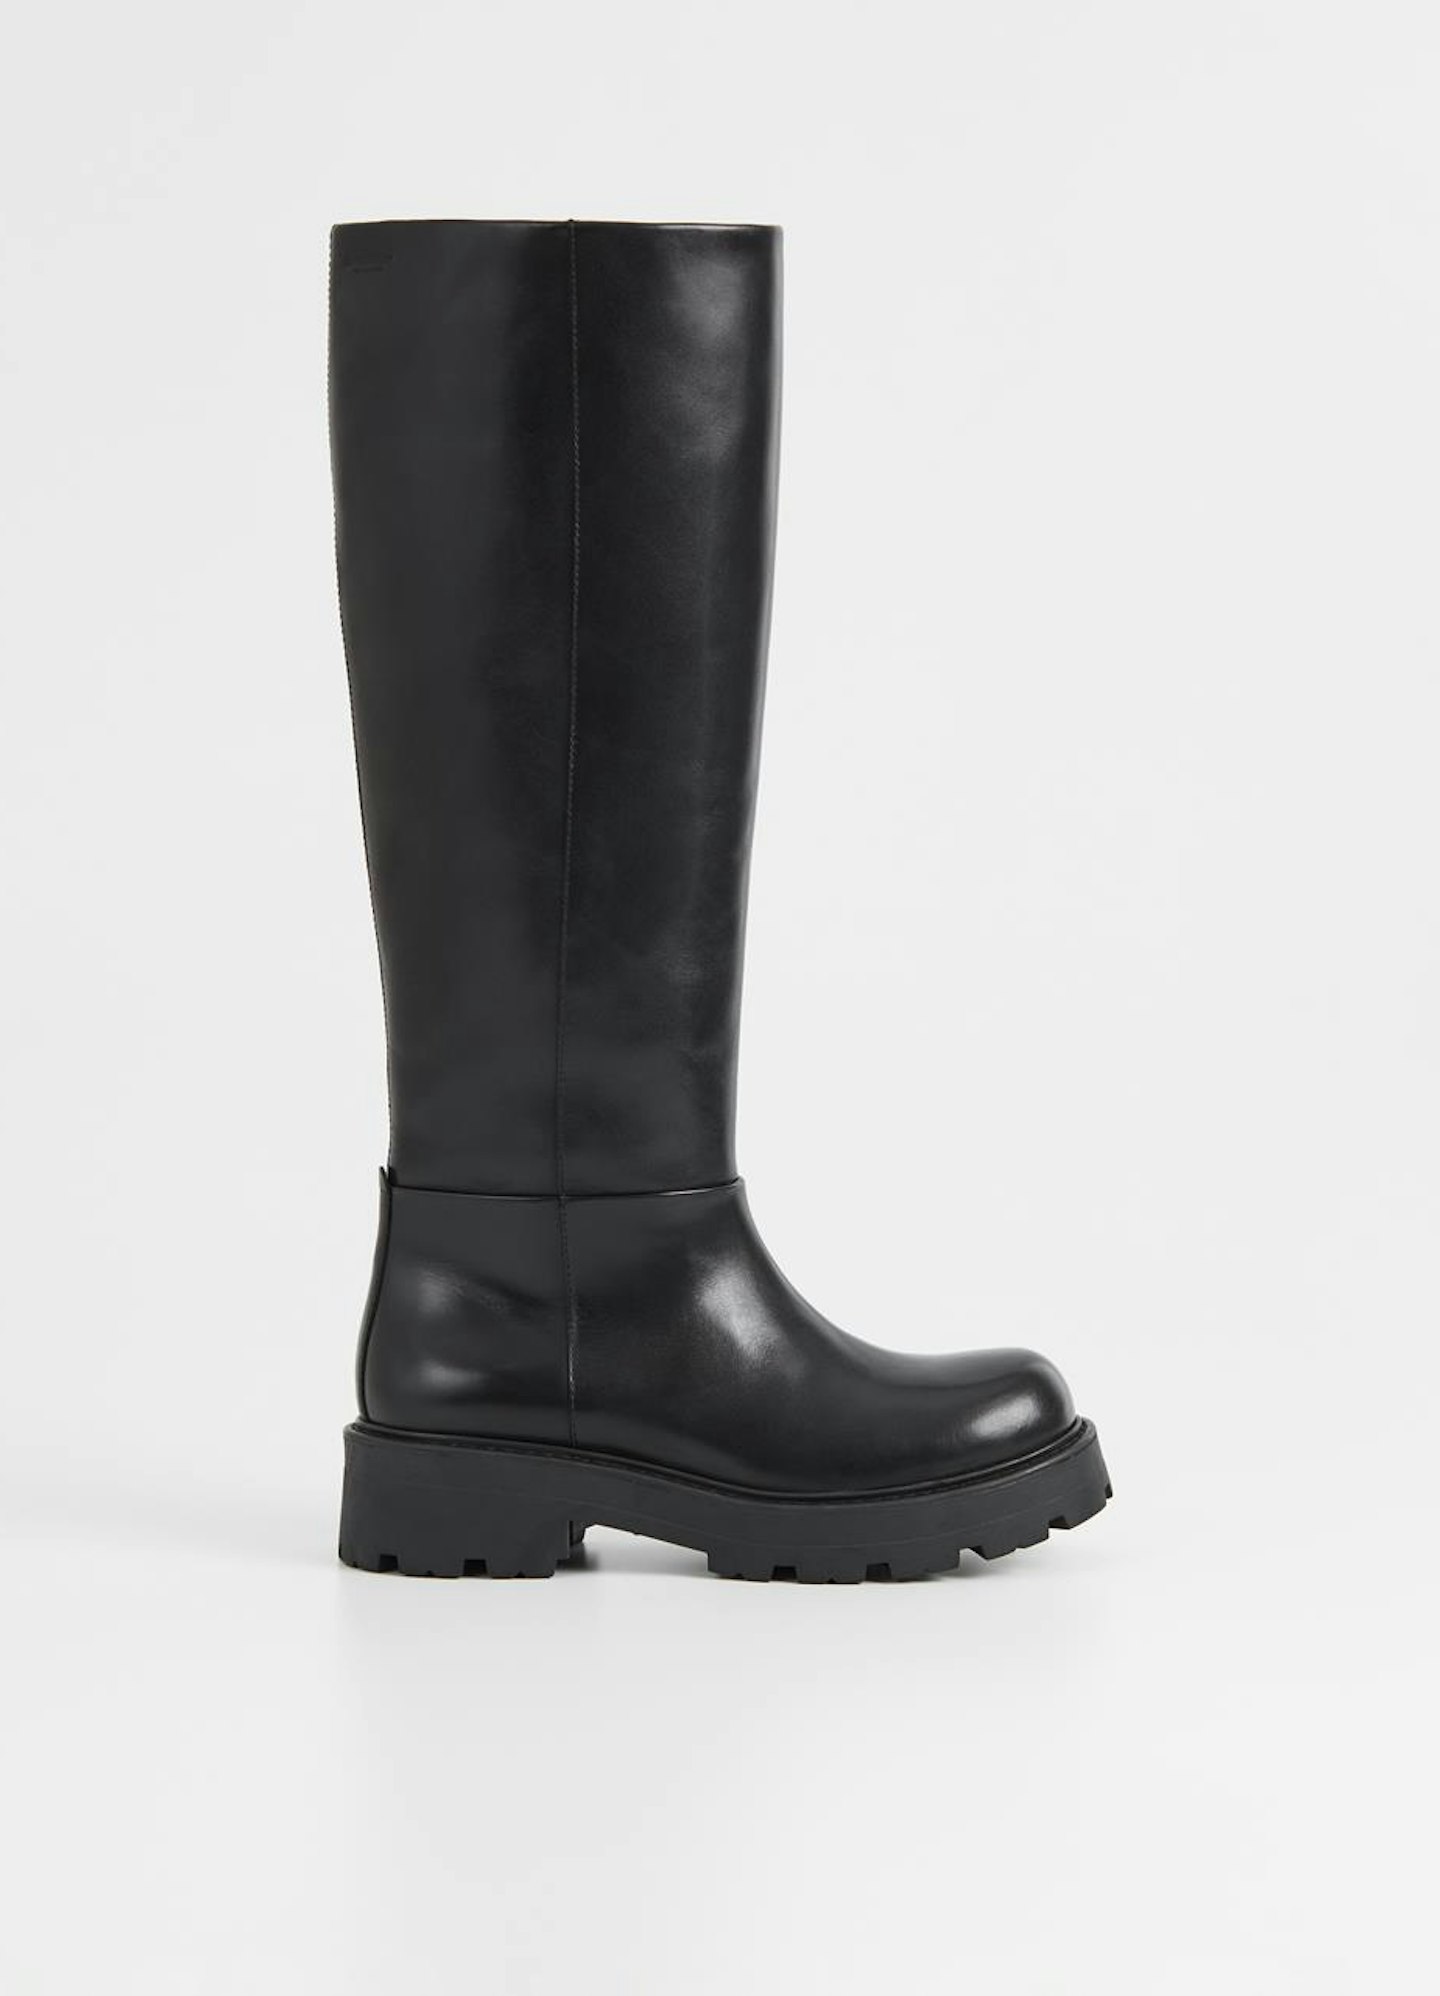 Vagabond Cosmo 2.0 Tall Boots